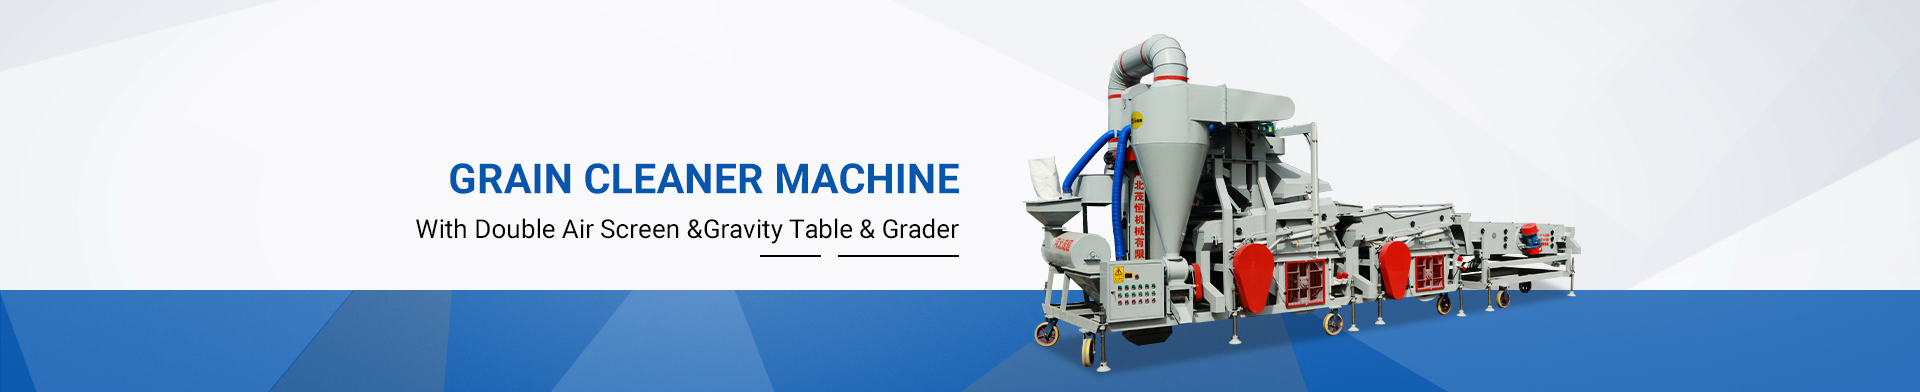 Combined seed cleaning machine with gravity table